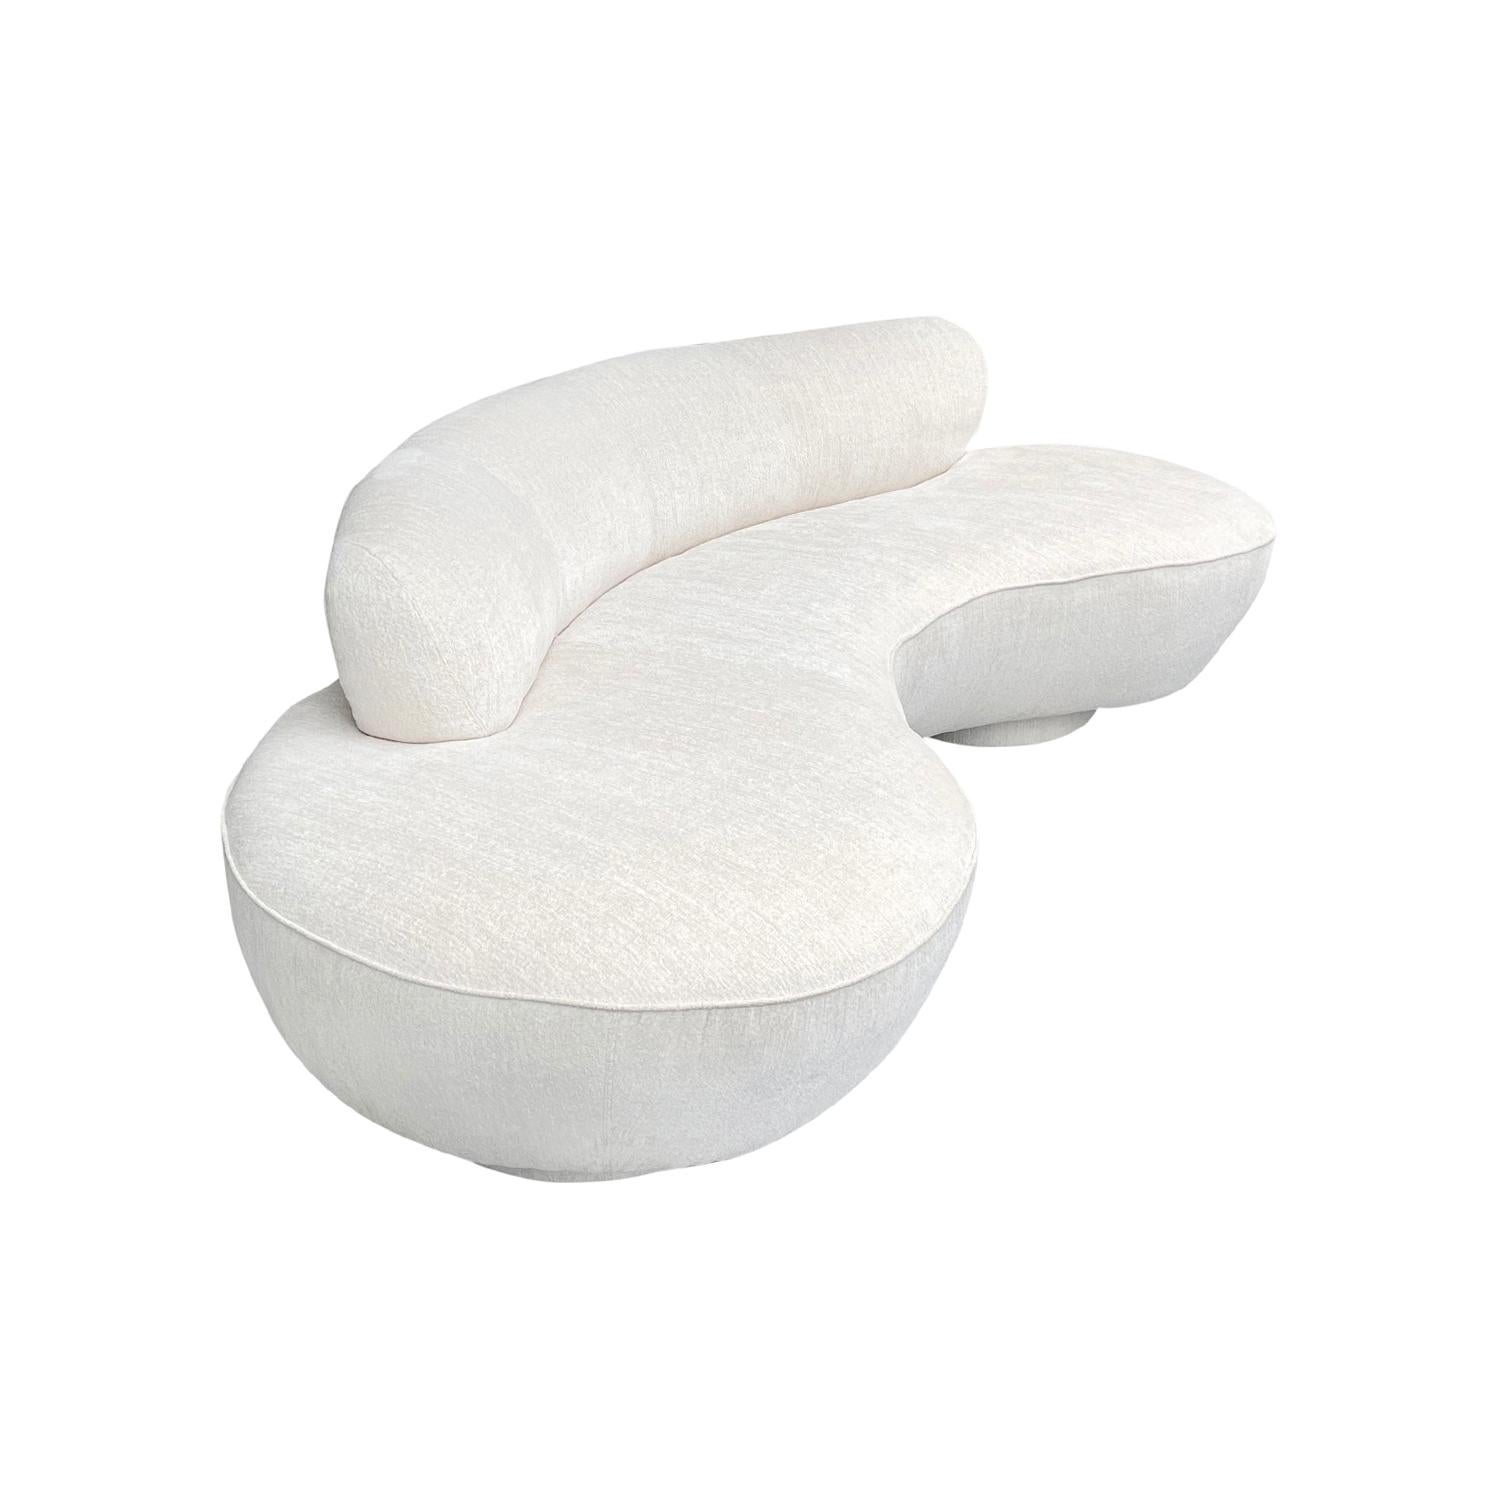 Fabric 20th Century White American Directional Sofa, Curved Settee by Vladimir Kagan For Sale